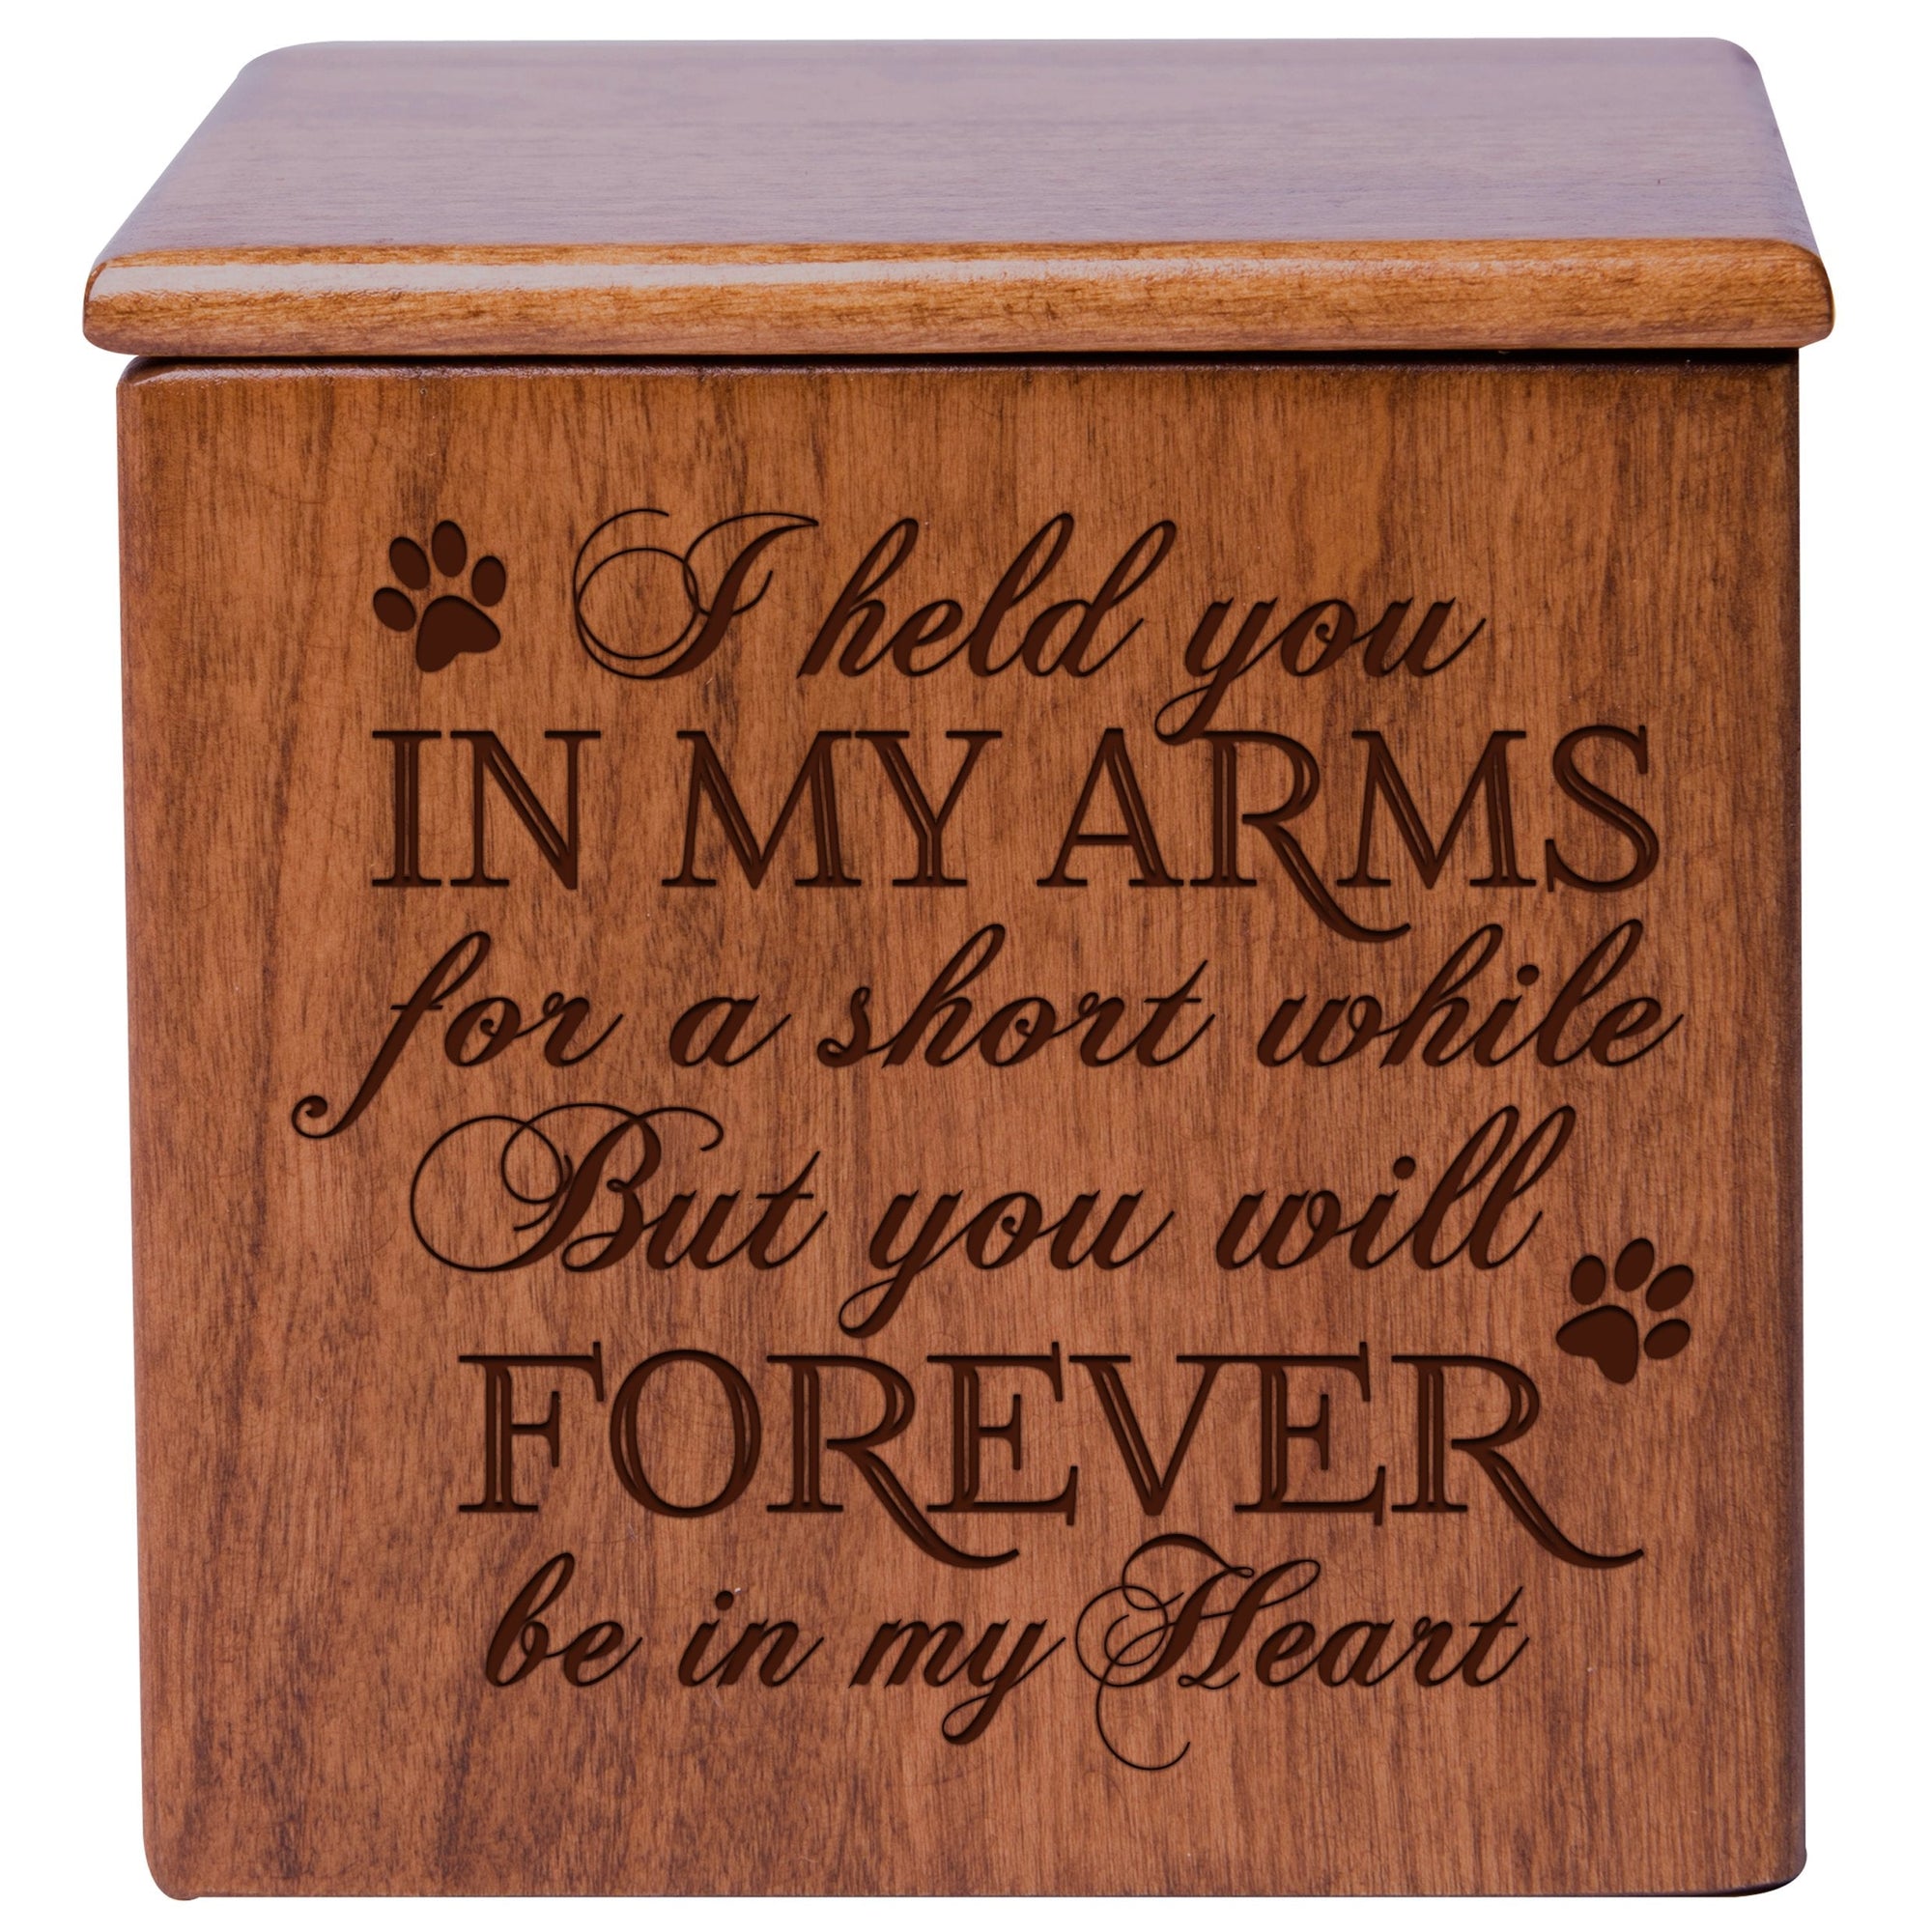 Cherry Pet Memorial 3.5x3.5 Keepsake Urn with phrase "I Held You In My Arms"